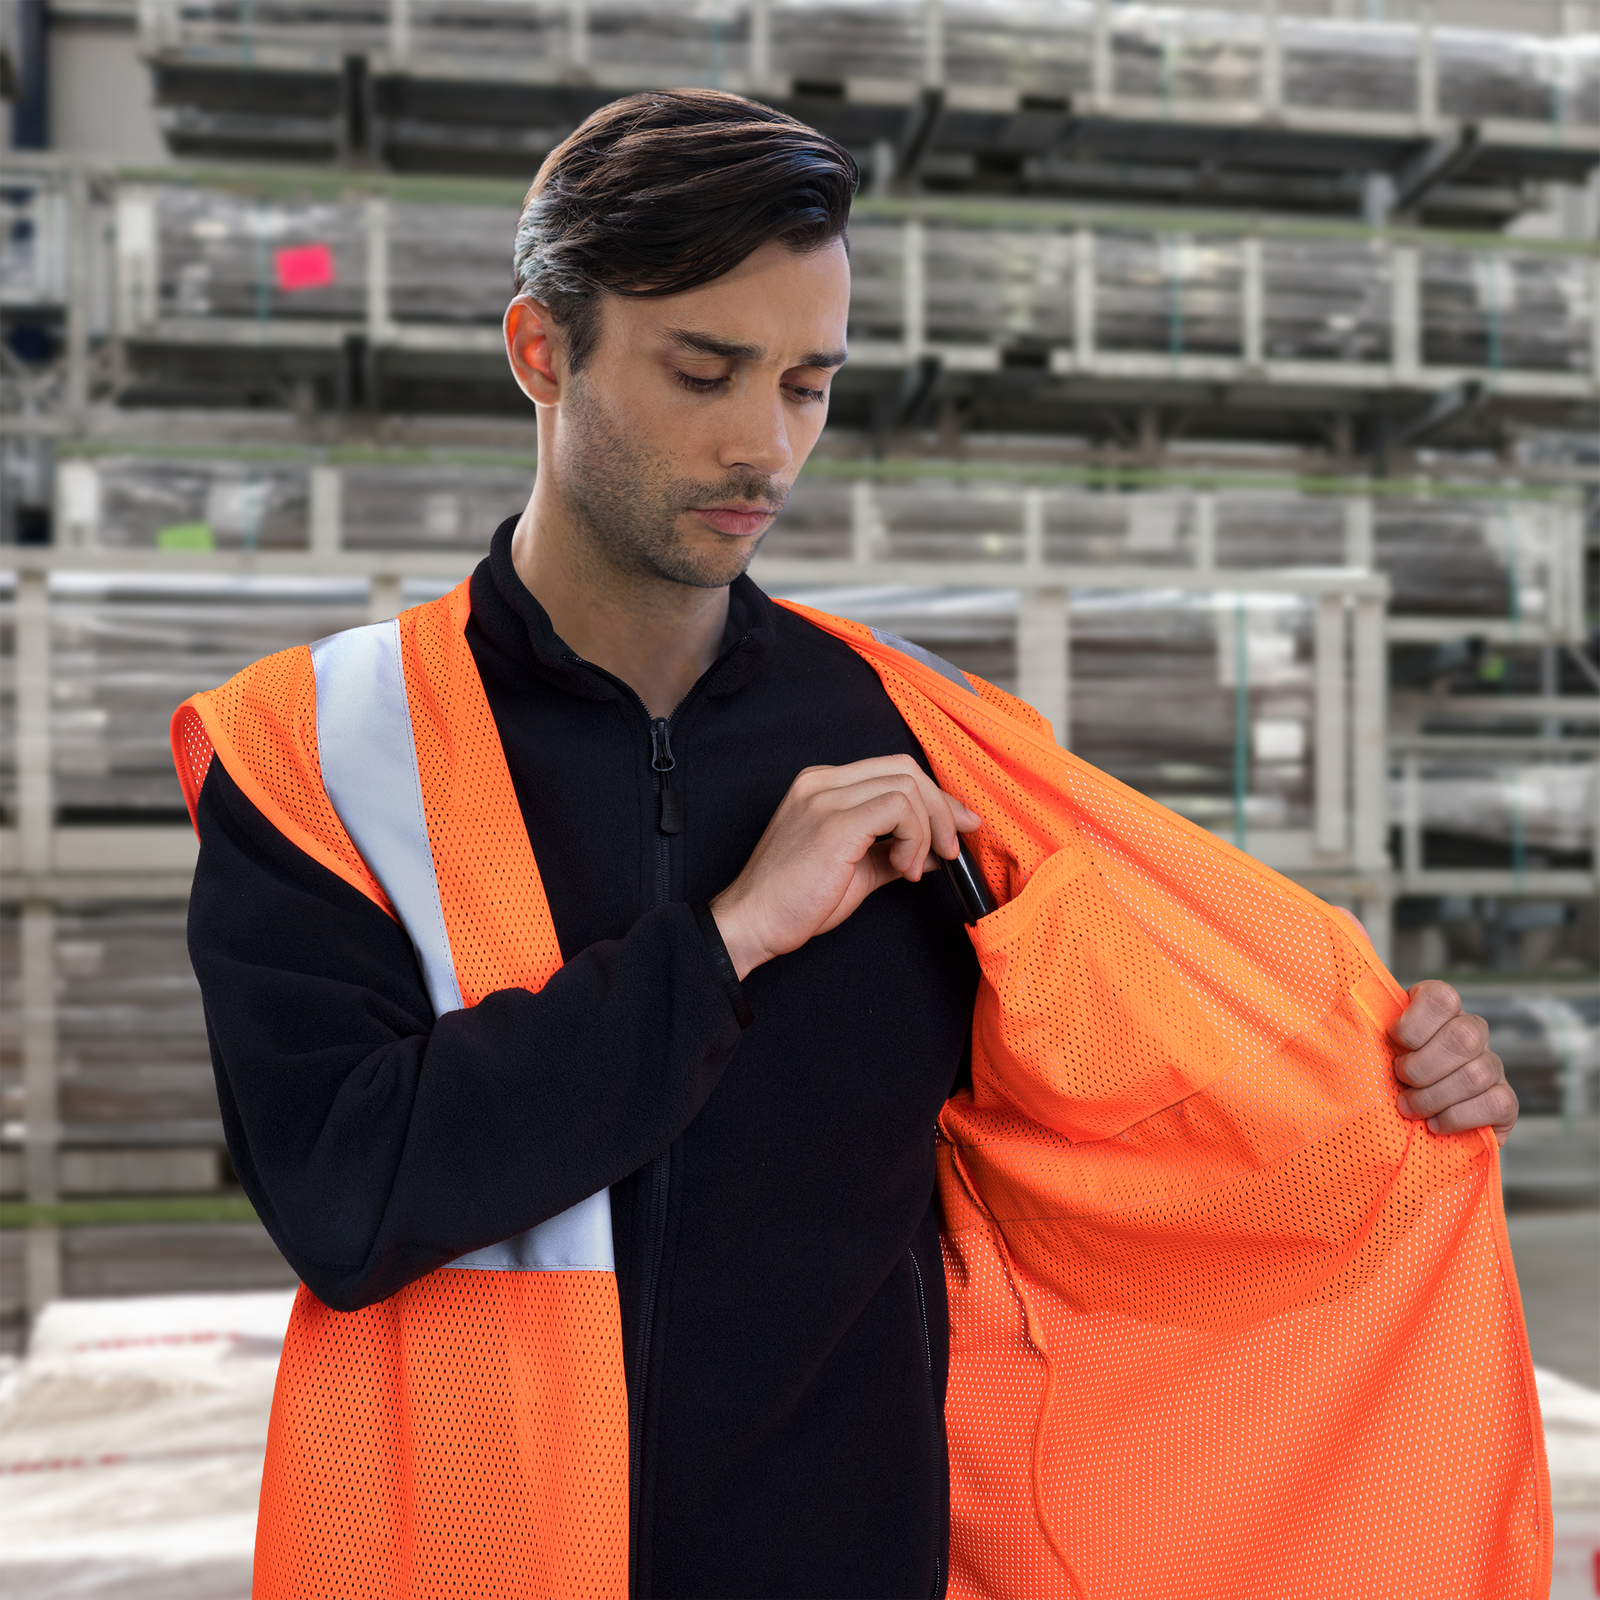 Man in a warehouse wearing the orange high visibility safety vest with one inner chest pocket